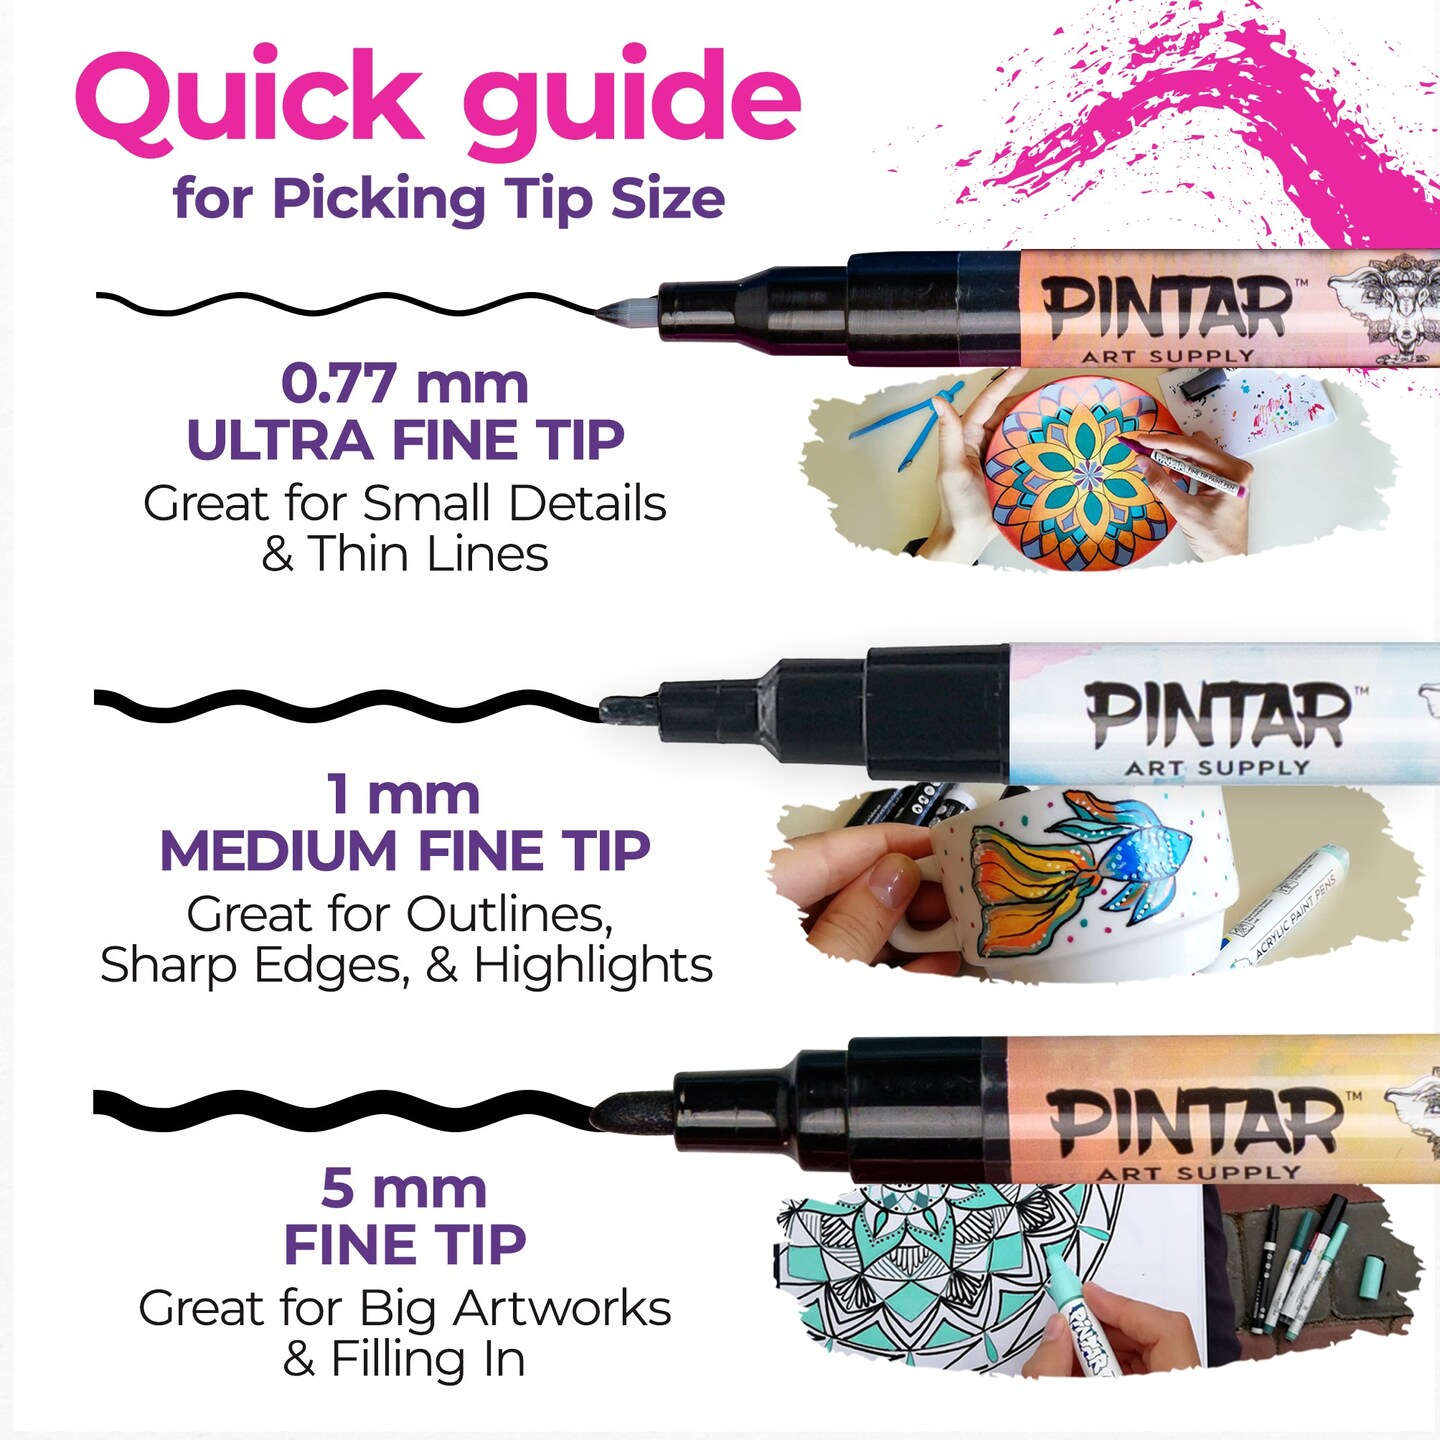 PINTAR Acrylic Paint Markers Medium Point - Medium Point Paint Markers - Acrylic Paint Markers Set - Acrylic Paint Pens for Rock Painting, Wood, Glass, Leather, Shoes - Pack of 26, 5.0mm